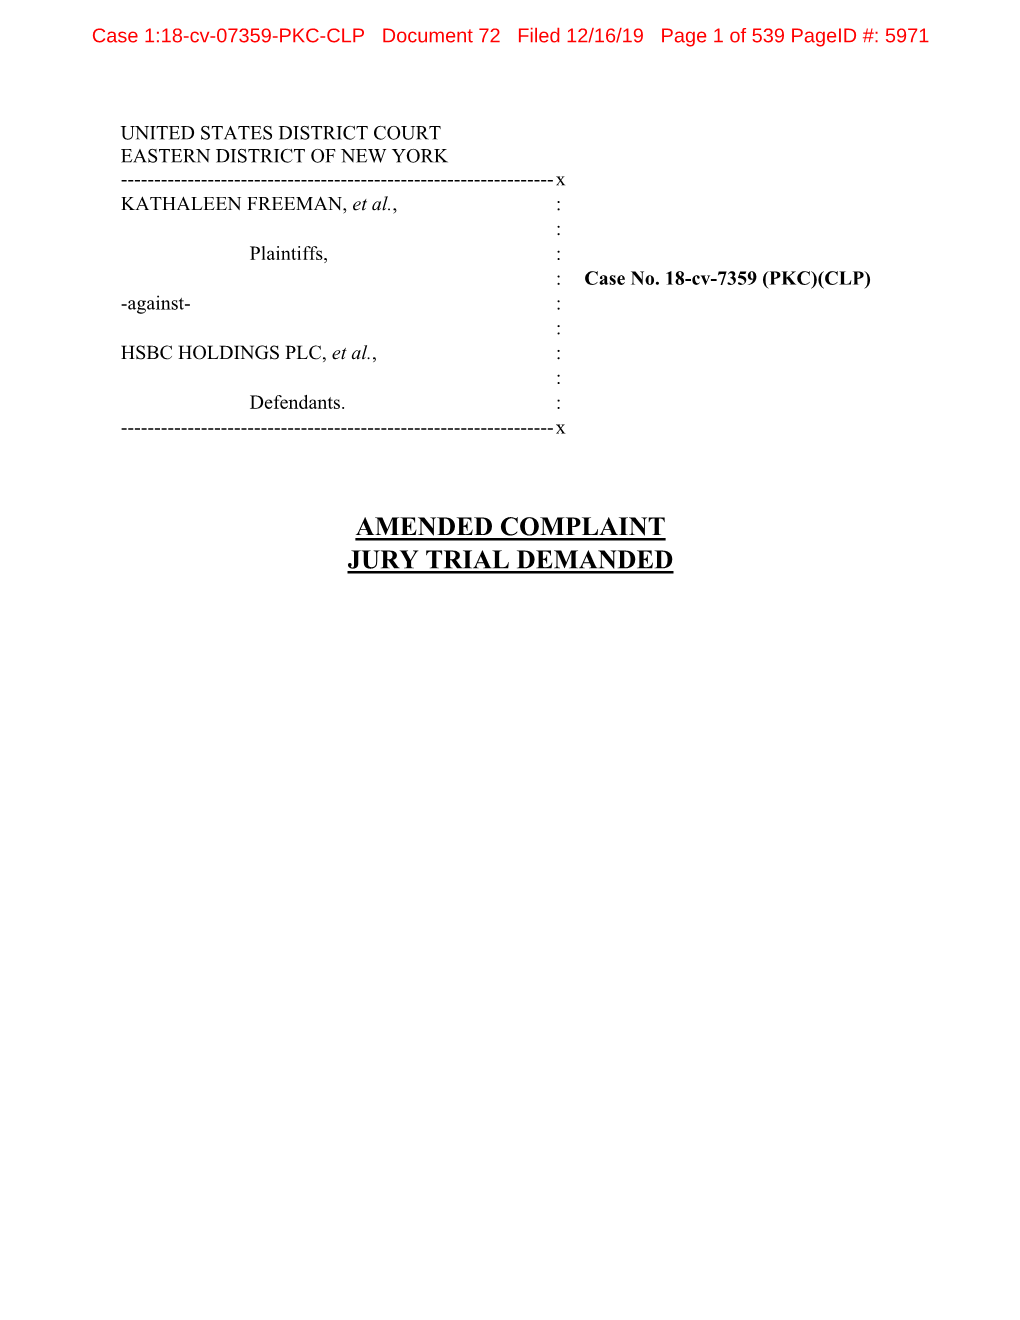 AMENDED COMPLAINT JURY TRIAL DEMANDED Case 1:18-Cv-07359-PKC-CLP Document 72 Filed 12/16/19 Page 2 of 539 Pageid #: 5972